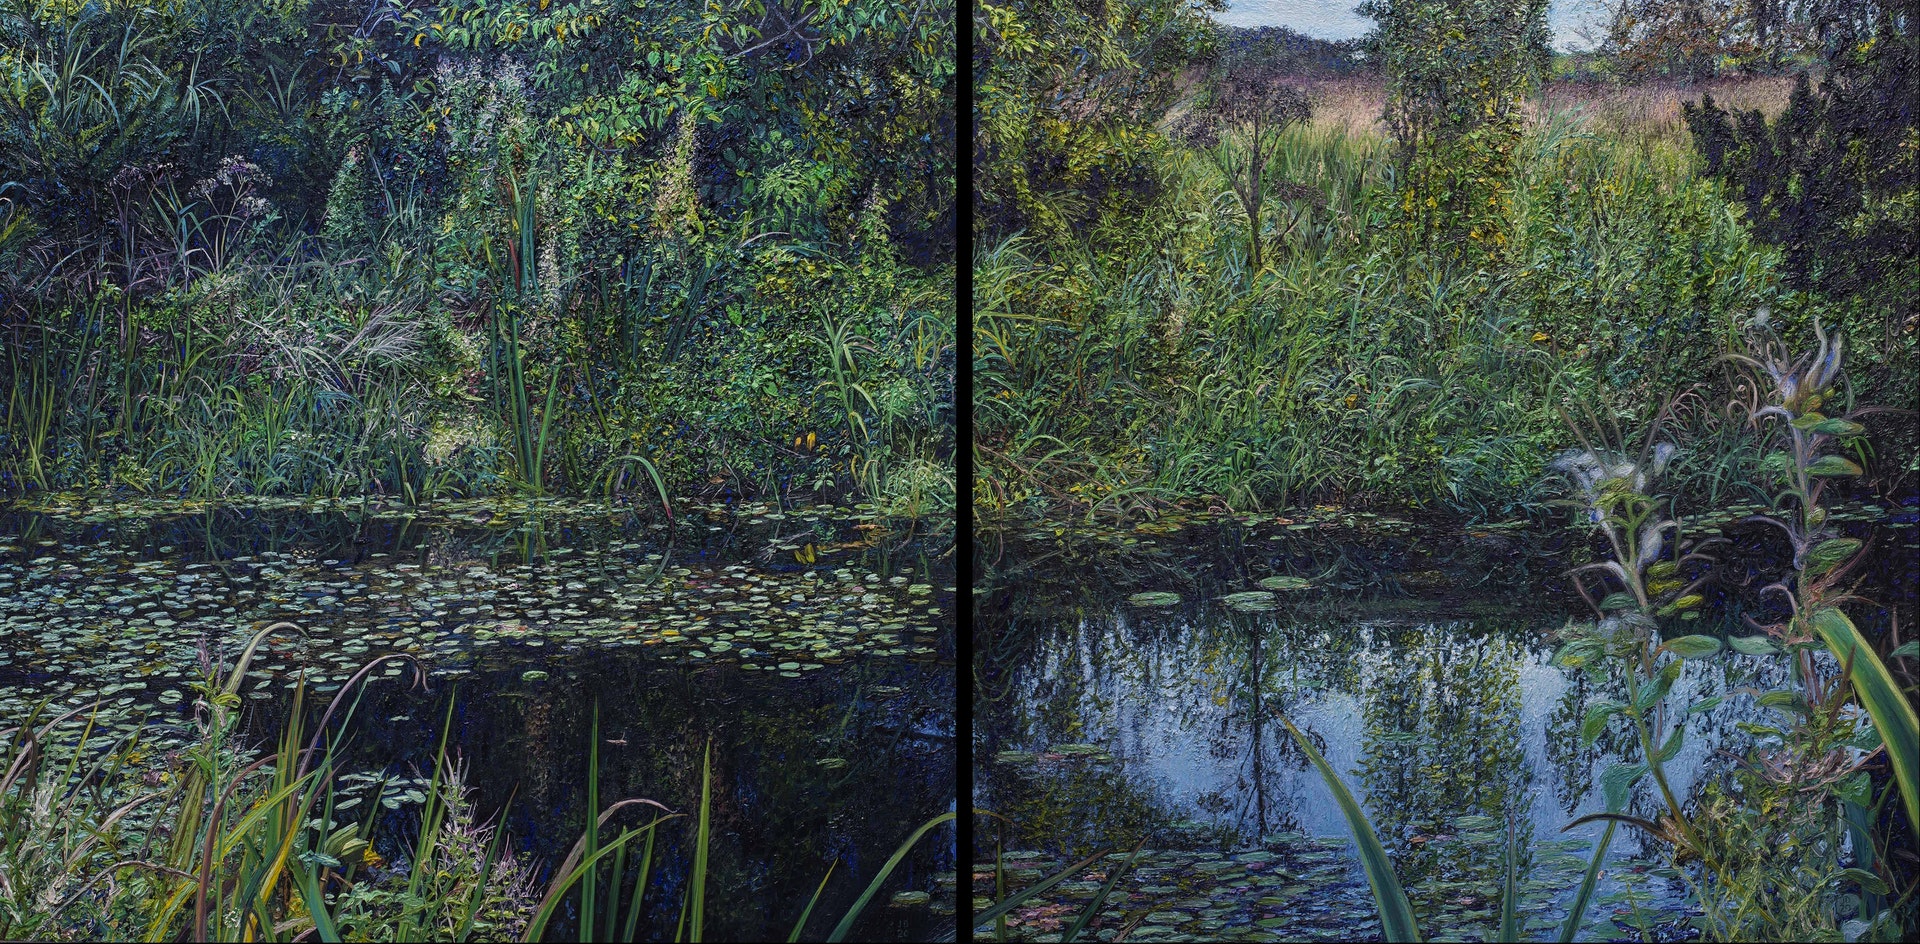 'An empty bliss in the Maelström', Jonathan Dickson, Oil on 2 wood panels (diptych), 61 x 122 cm